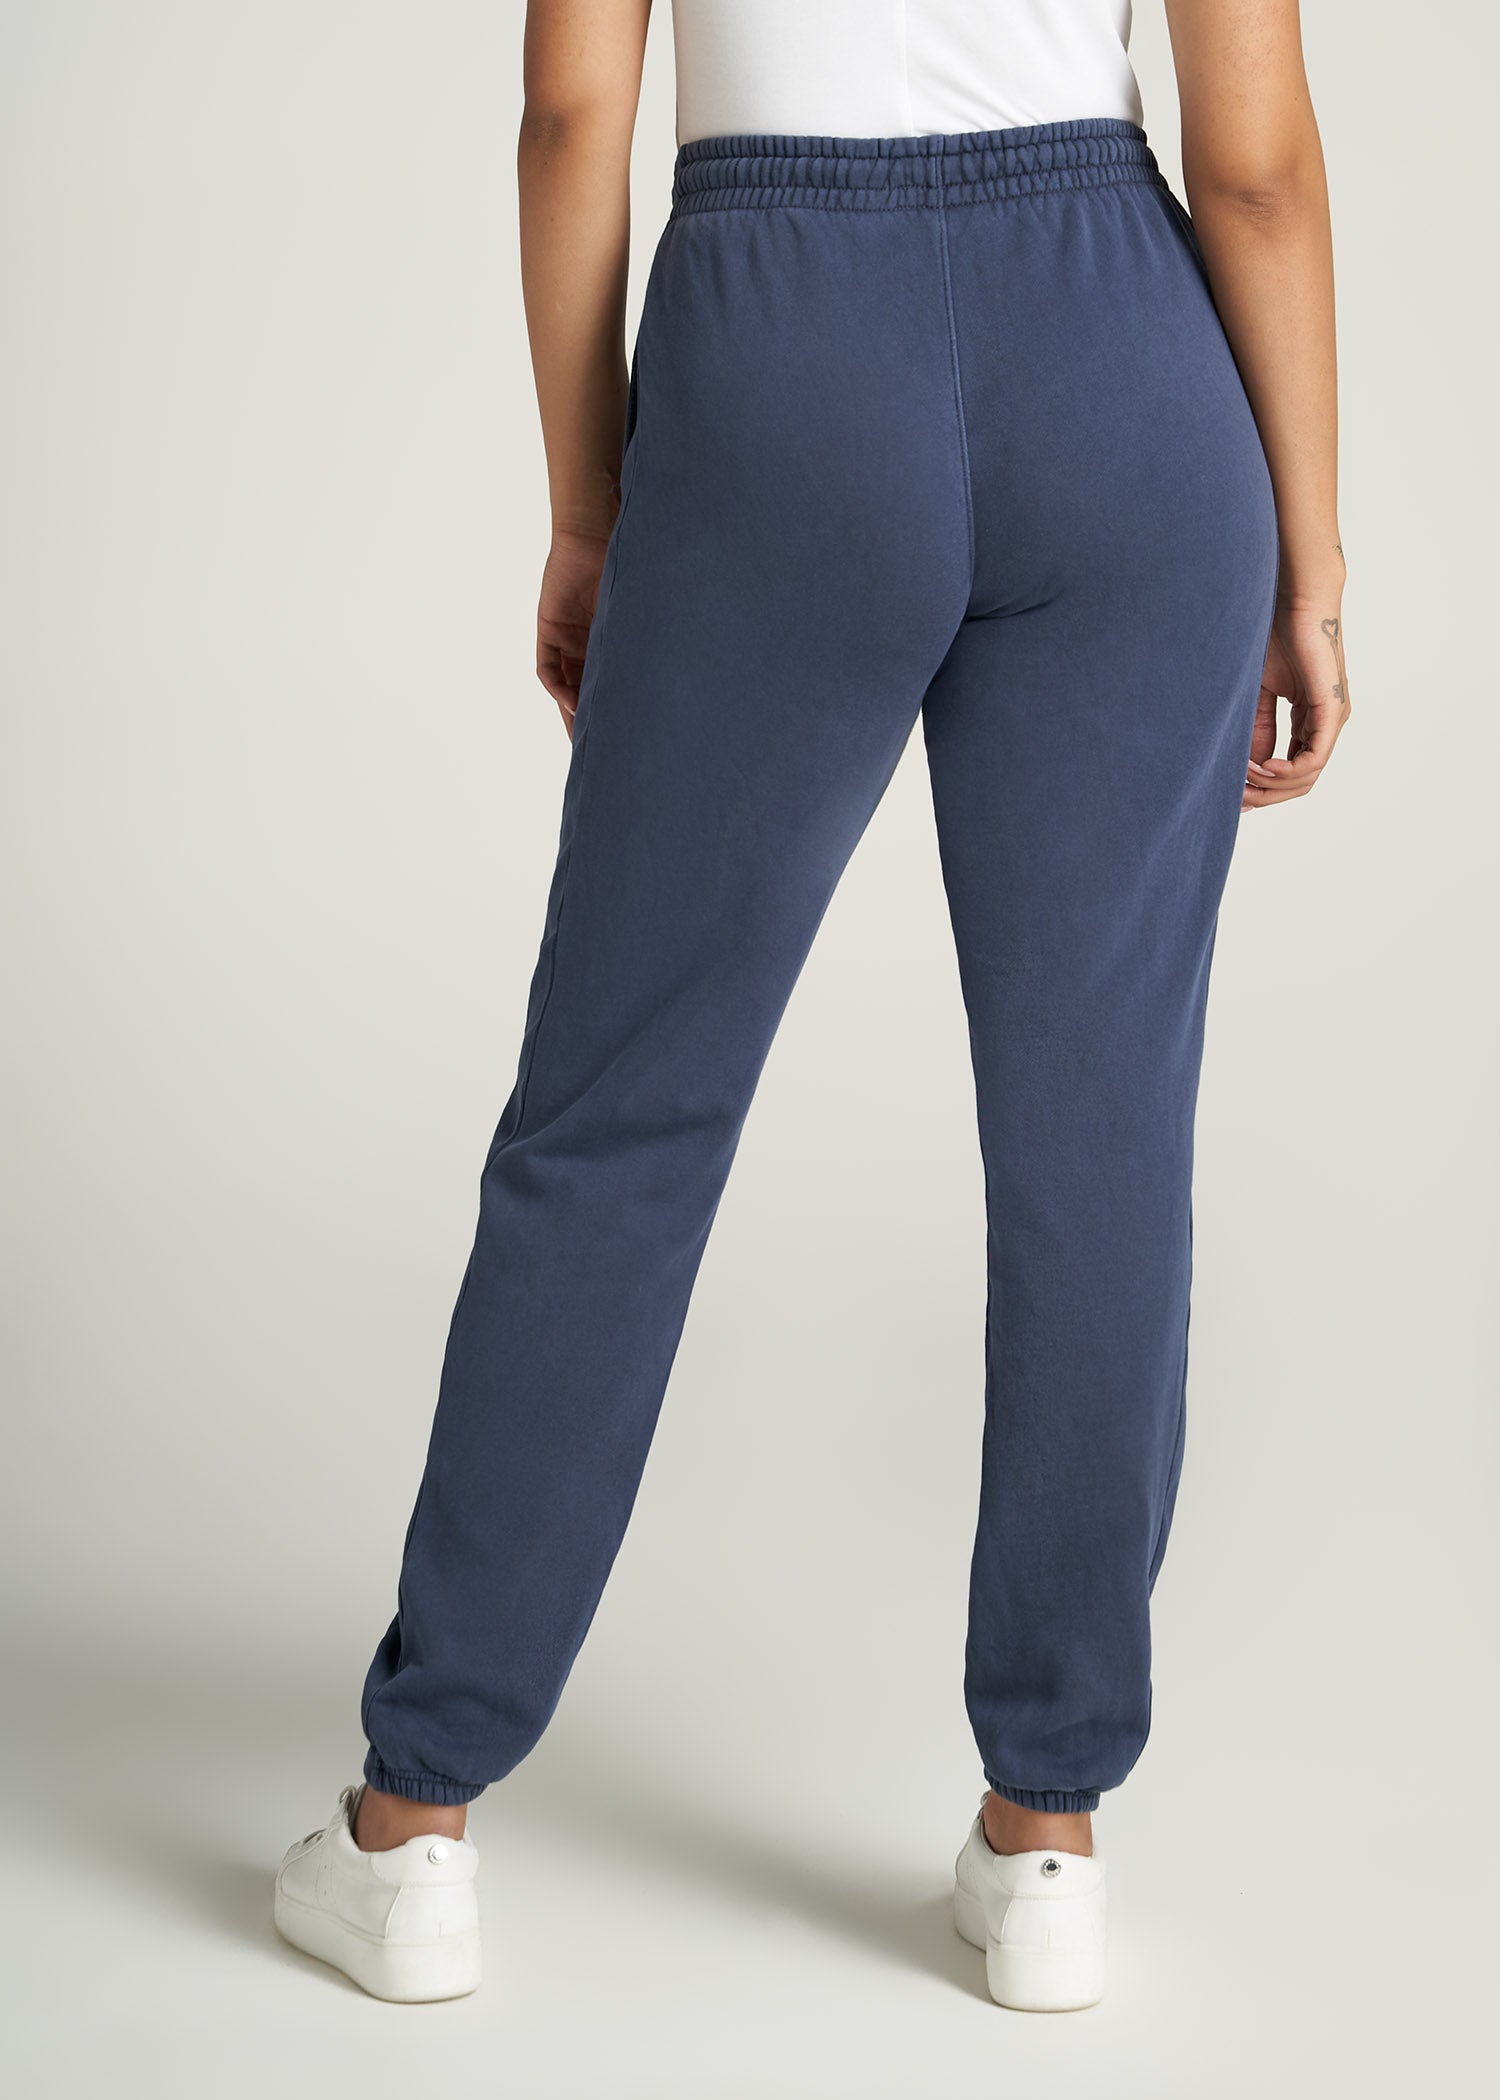 Athletic Works, Pants & Jumpsuits, Womens Rib Cuff Woven Pant Navy Blue